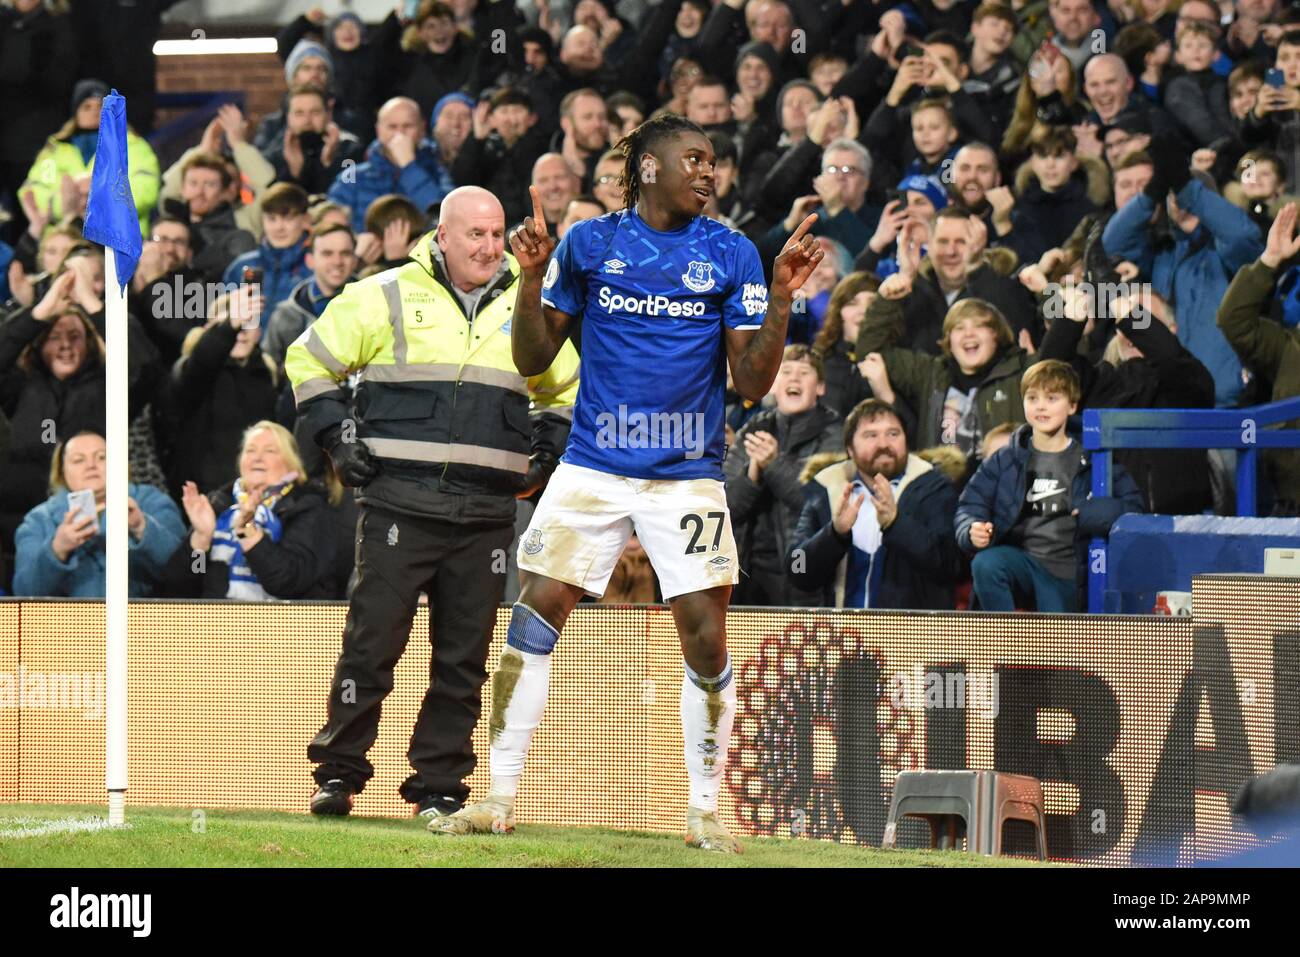 21st January 2020, Goodison Park, Liverpool, England; Premier League, Everton v Newcastle United : Moise Kean (27) of Everton celebrates his goal with a dance in front of the home supporters Stock Photo